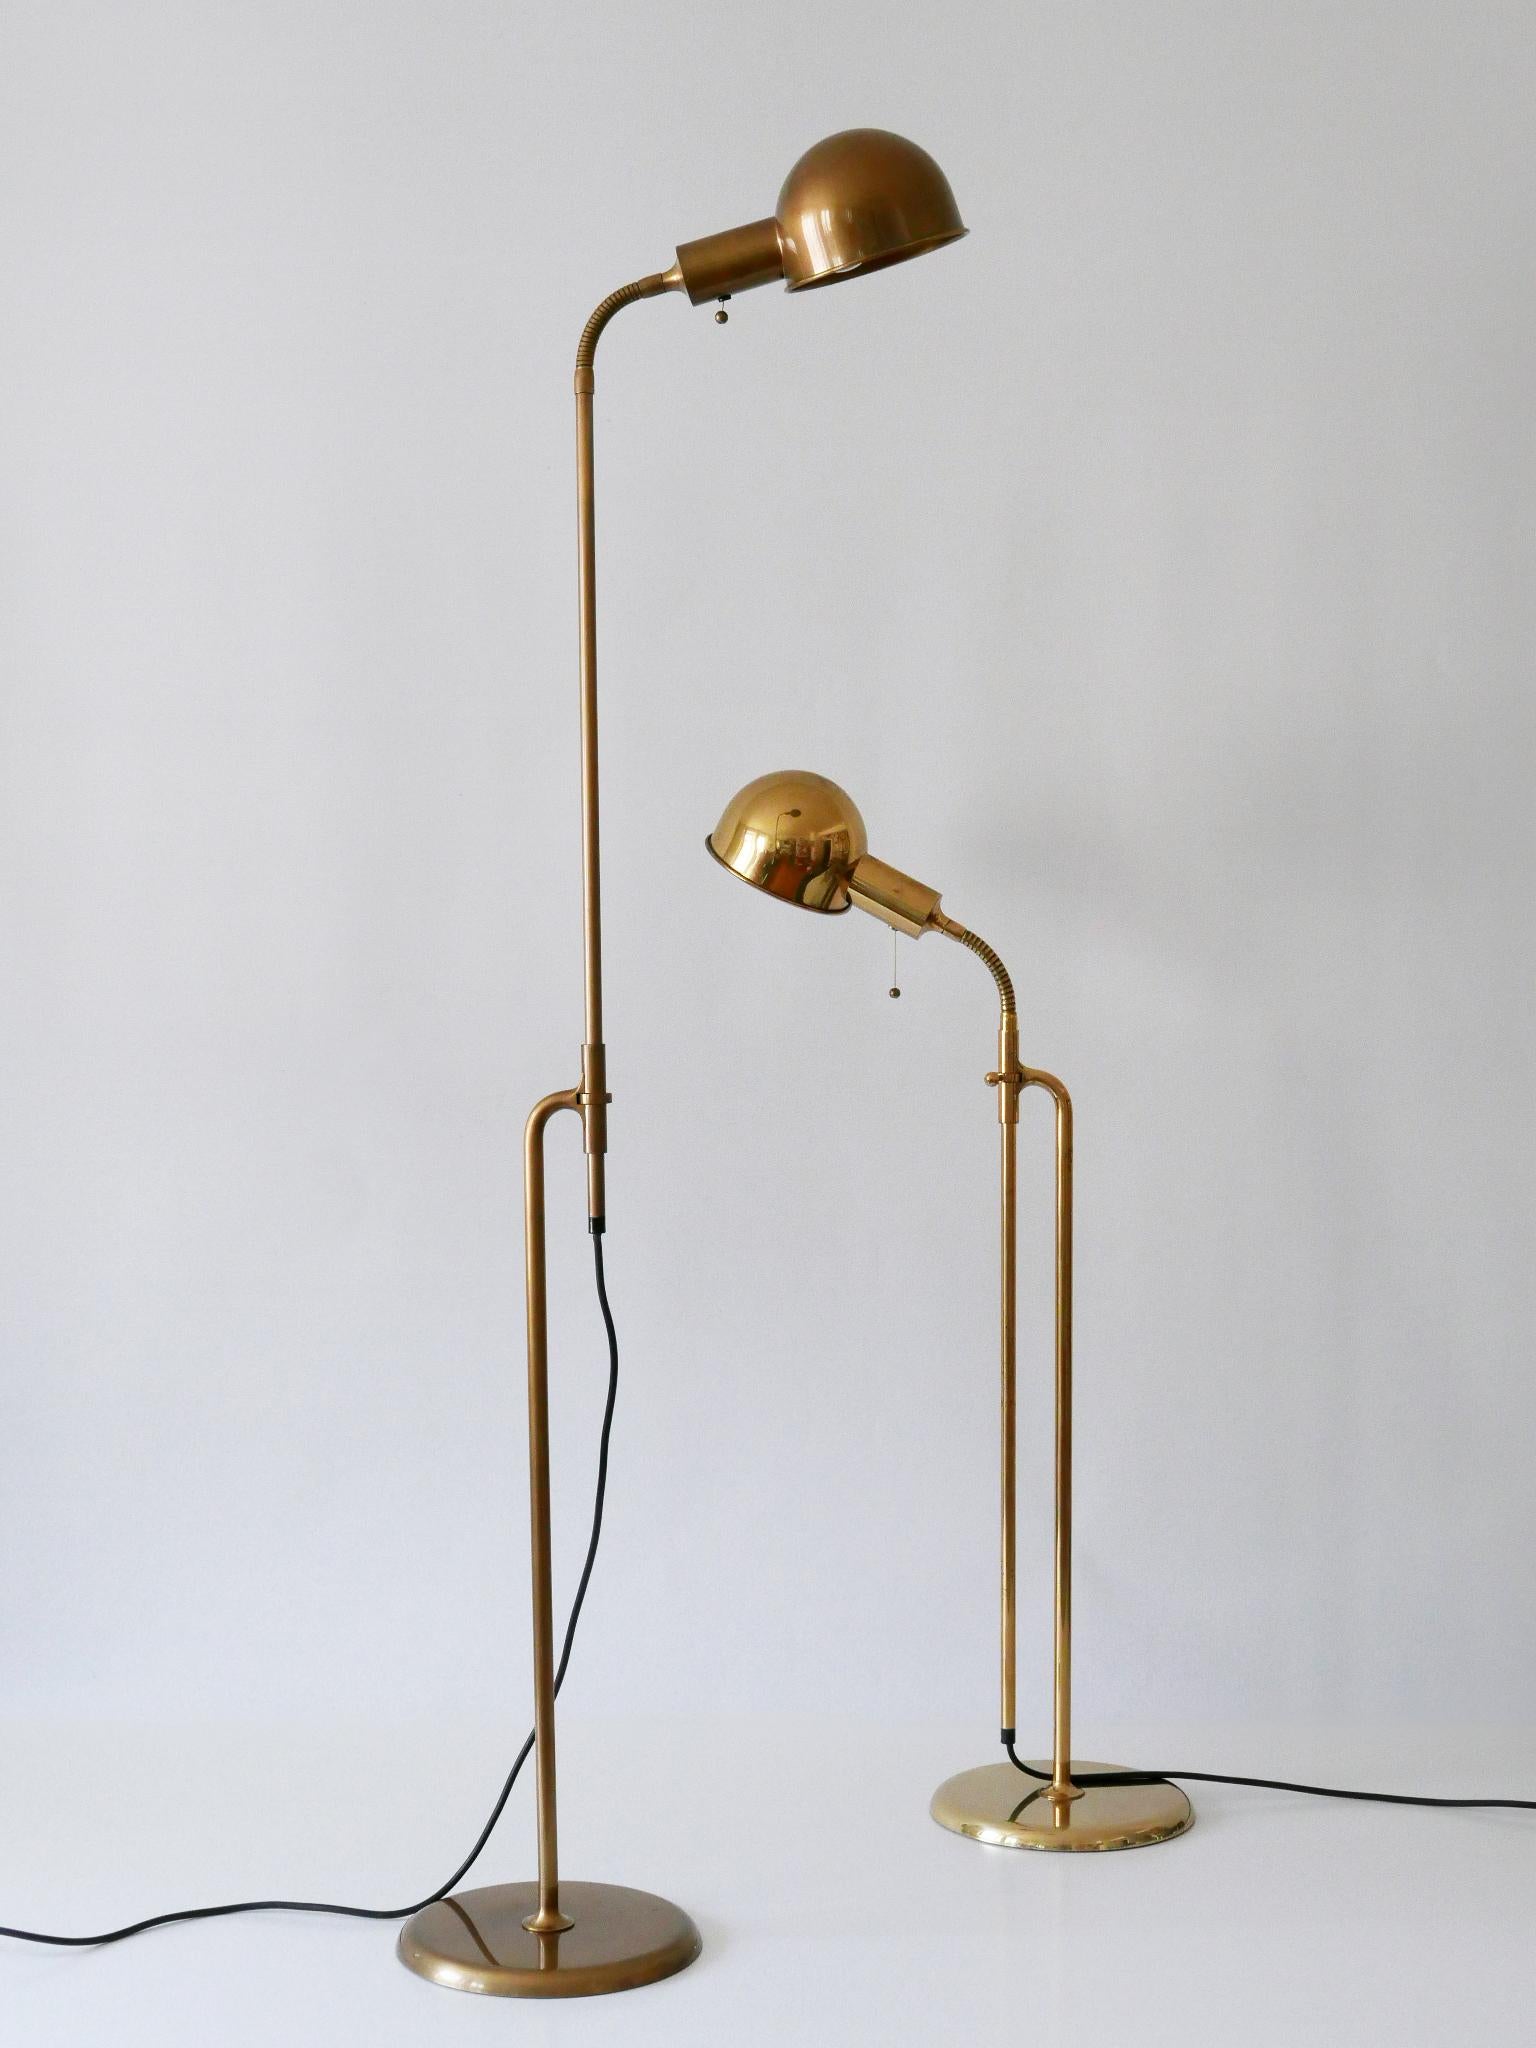 Late 20th Century Set of Two Mid-Century Modern Reading Floor Lamps 'Bola' by Florian Schulz 1970s For Sale